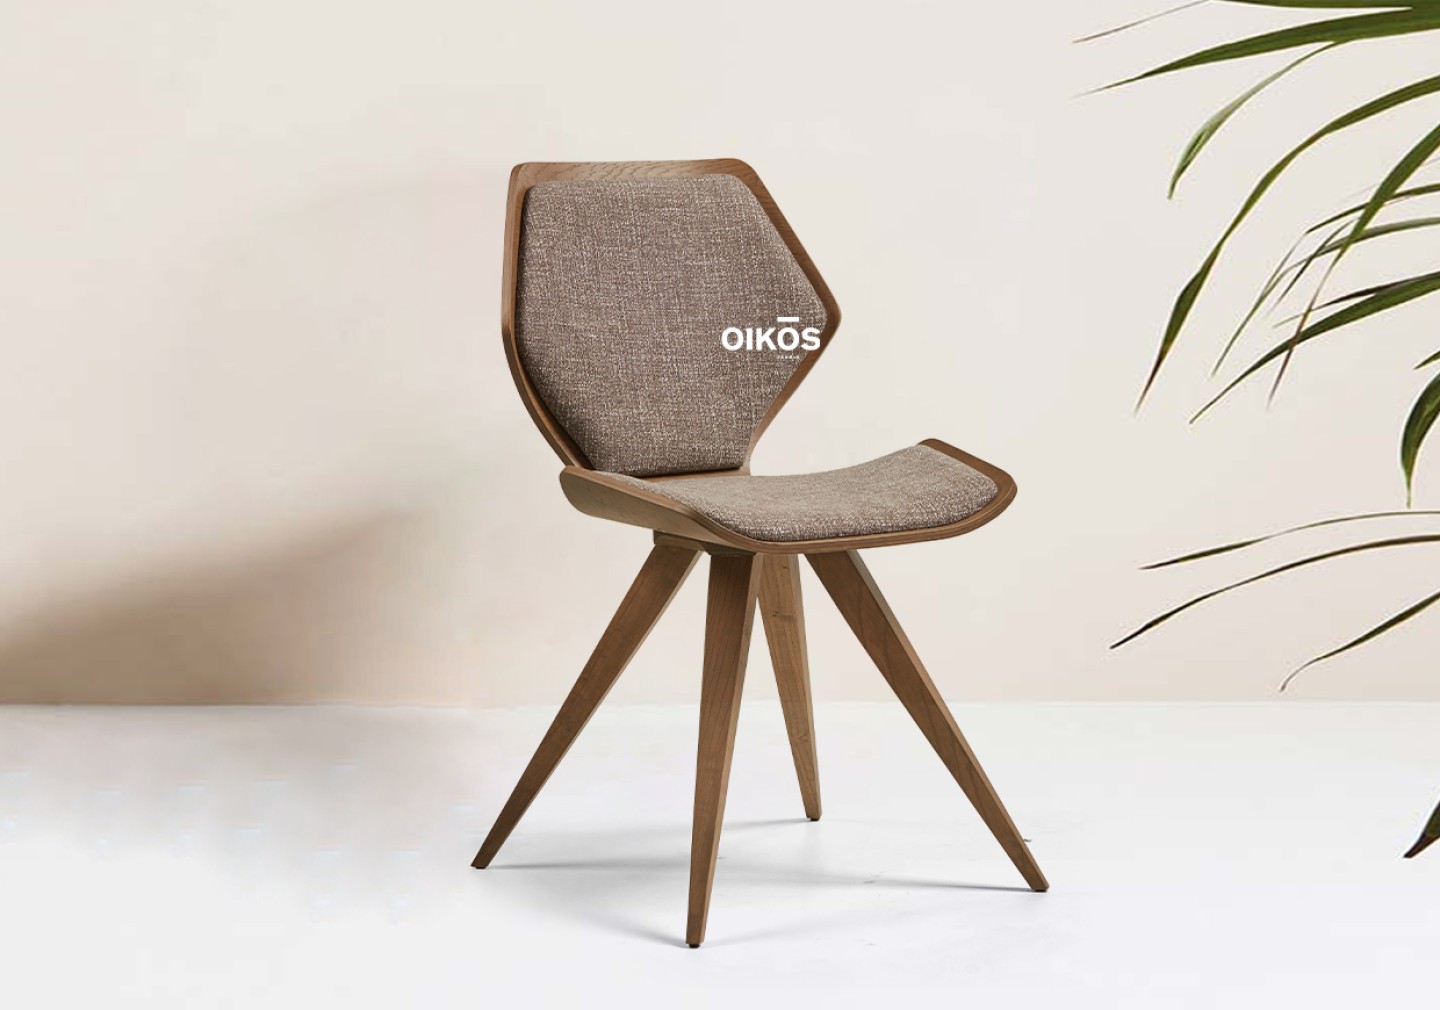 THE X JONAH DINING CHAIR